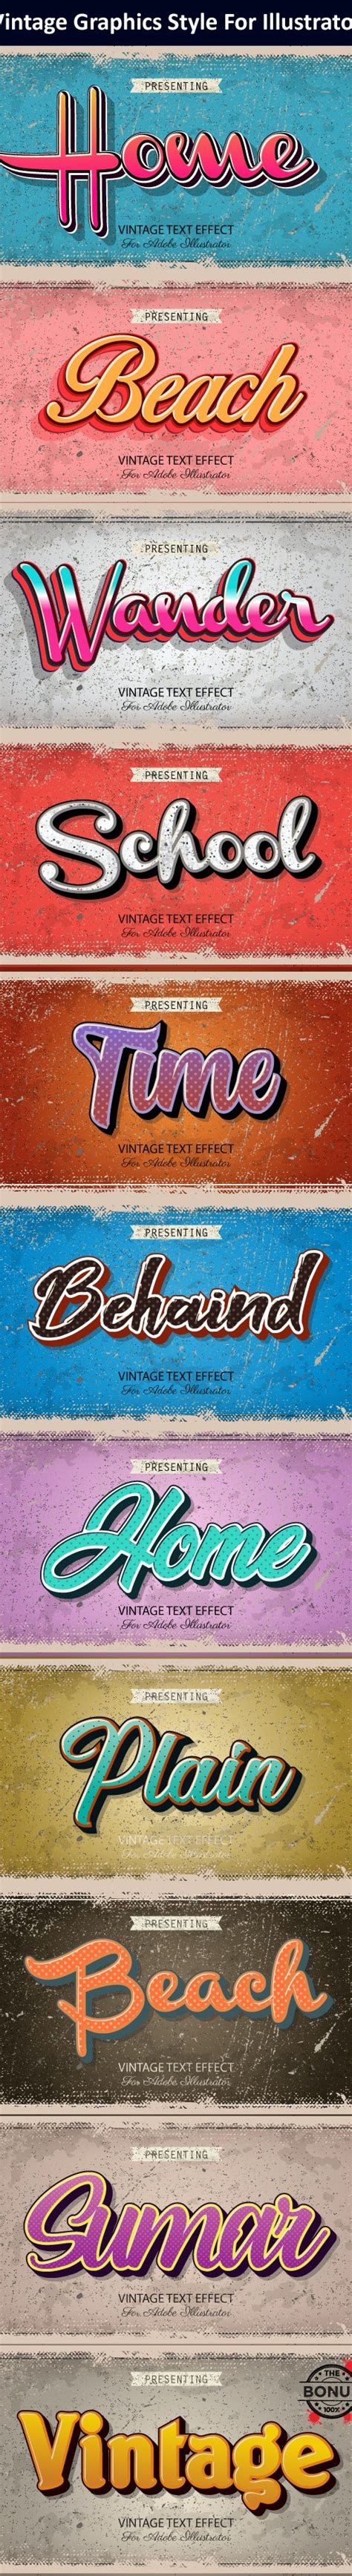 10 Different Vintage And Retro Graphic Styles For Adobe Illustrator